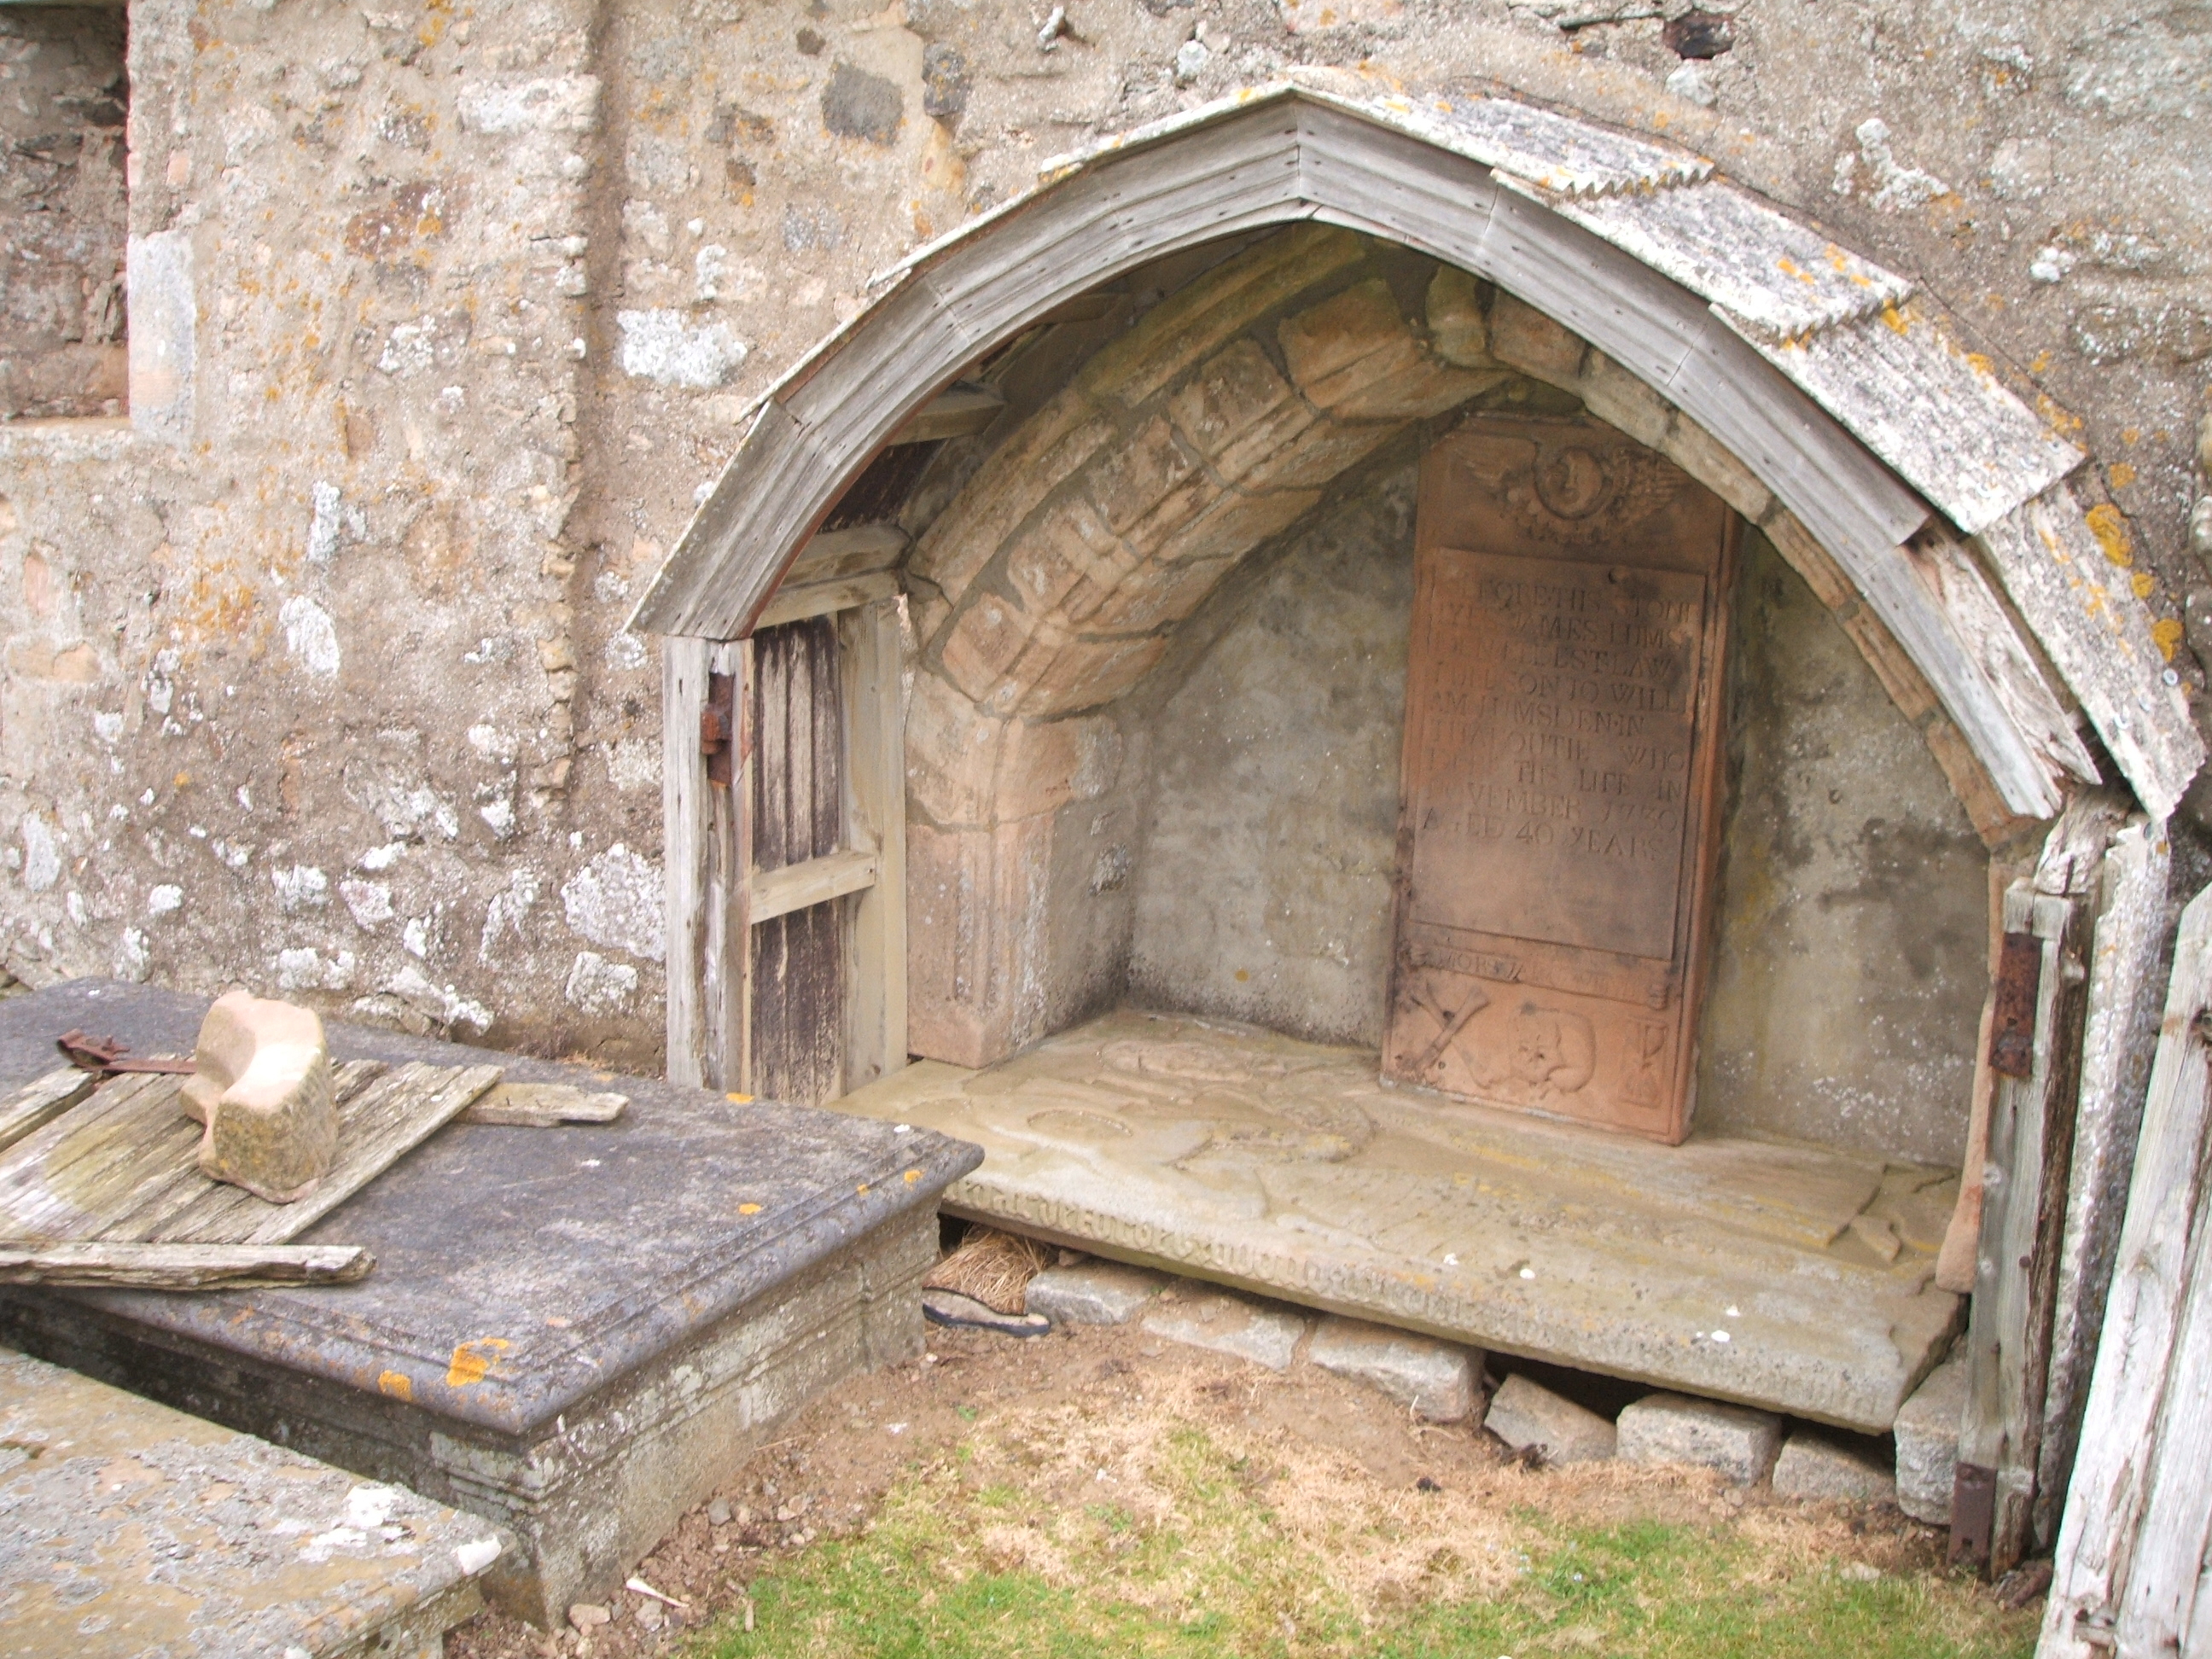 Photograph of a Medieval tomb at Kildrummie.